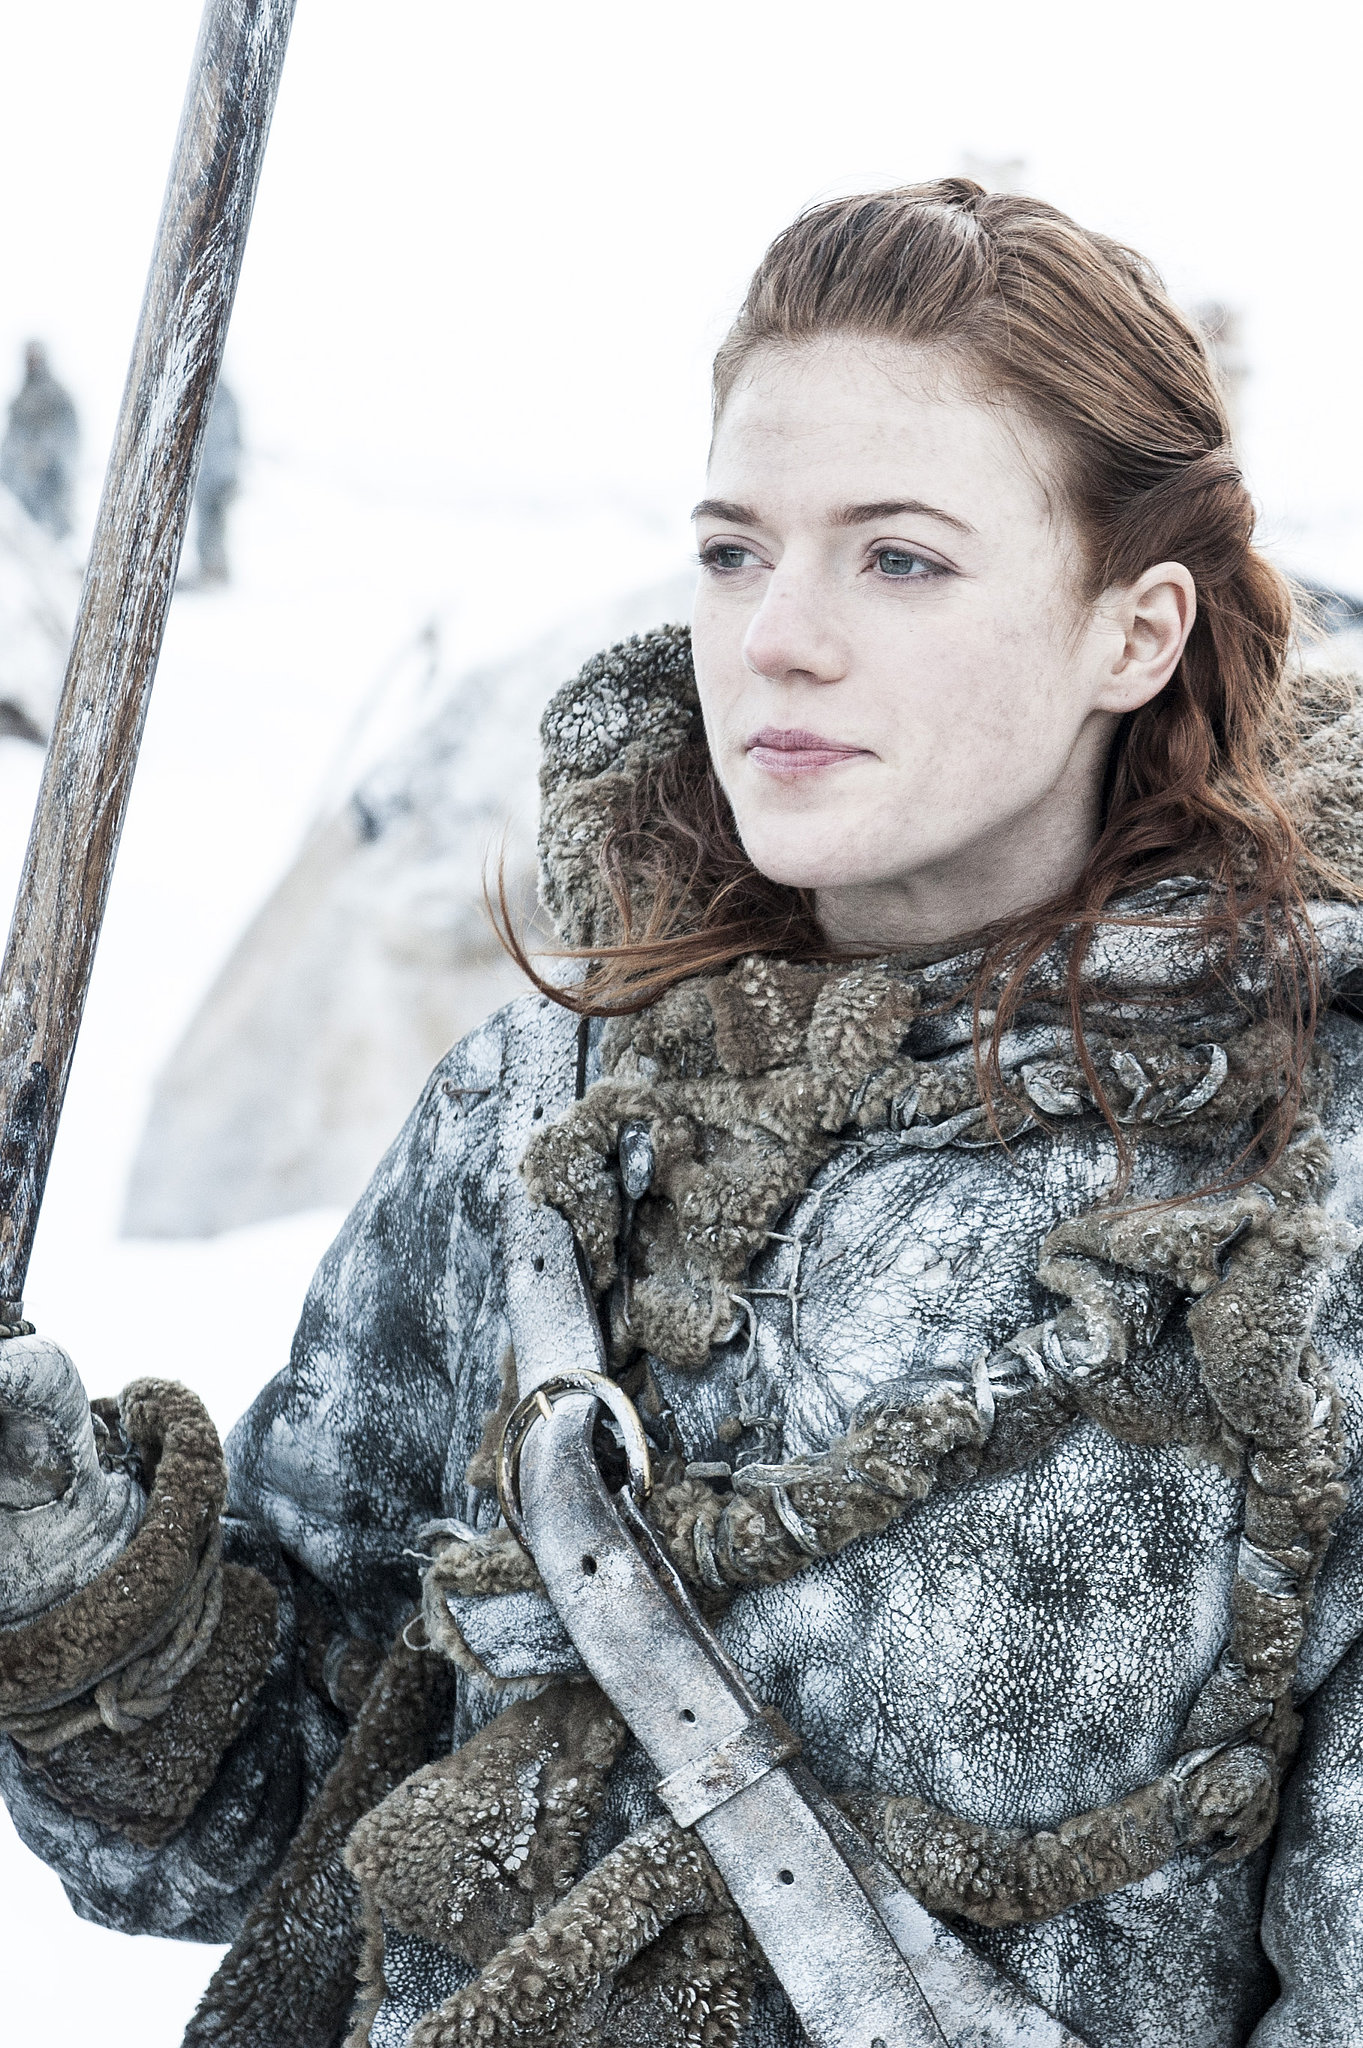 Ygritte From Game of Thrones | 450 Pop Culture Halloween Costume Ideas ...